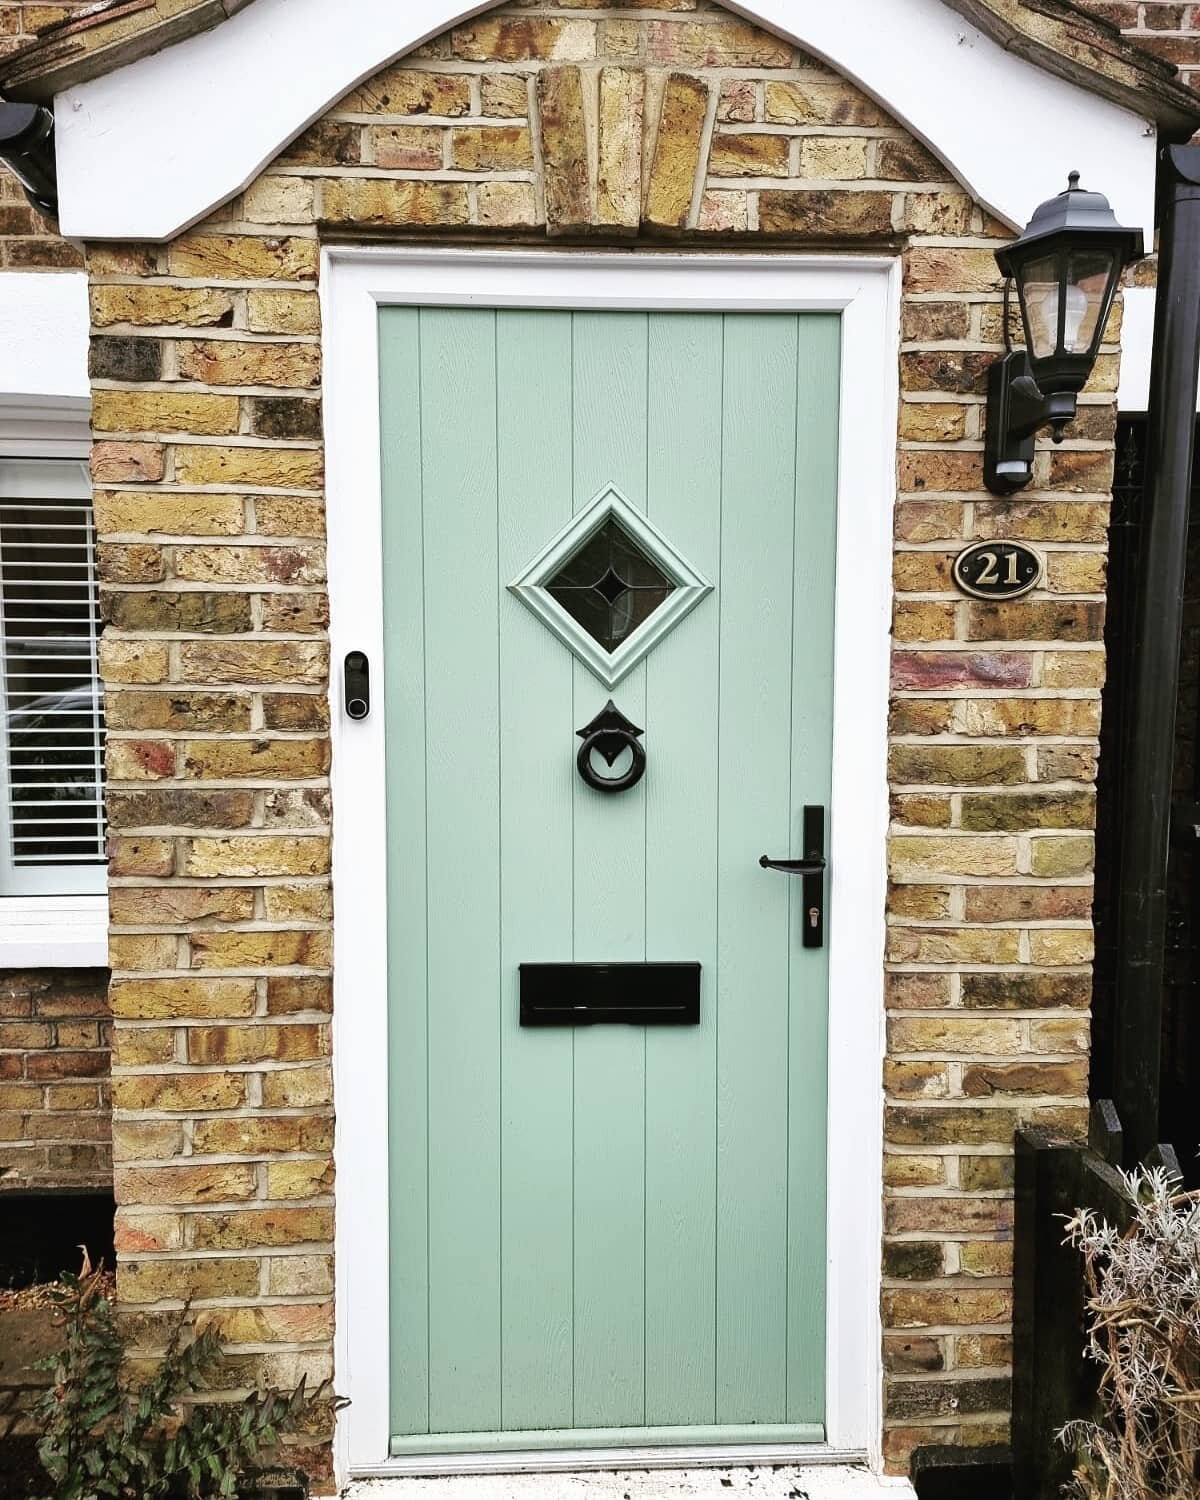 Quite a few Nest Hello installs today adding that finishing touch to these colourful front doors 👌
@googlenest 
#googlenestinstallation #googlenesthello #videodoorbell #smarthomes #homesecurity #electrician #niceicapprovedcontractor #londonelectrici